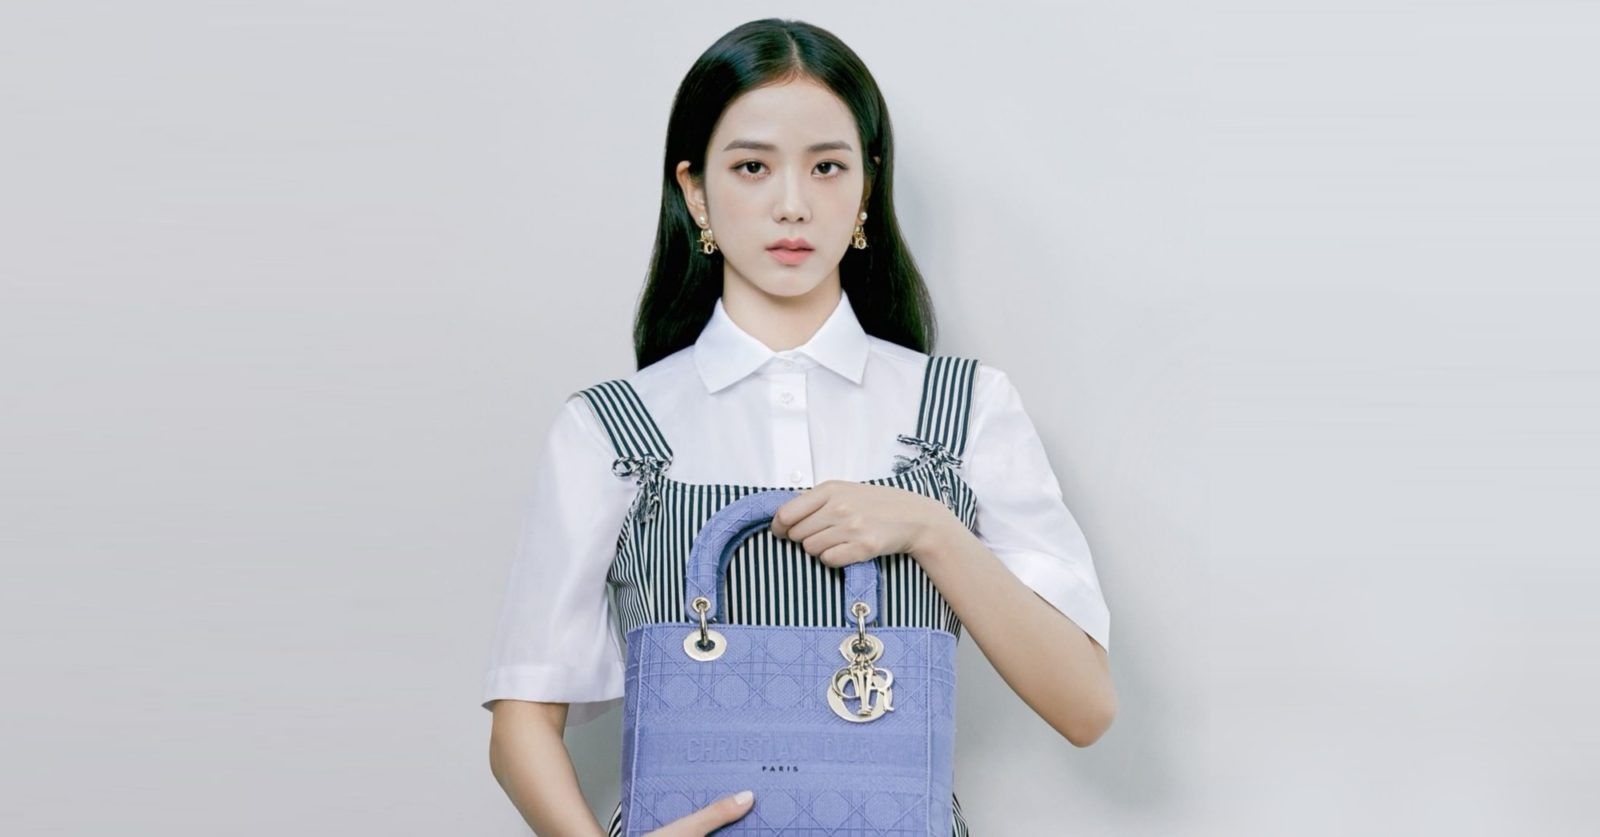 A closer look at Blackpink’s Jisoo and her Dior bag collection